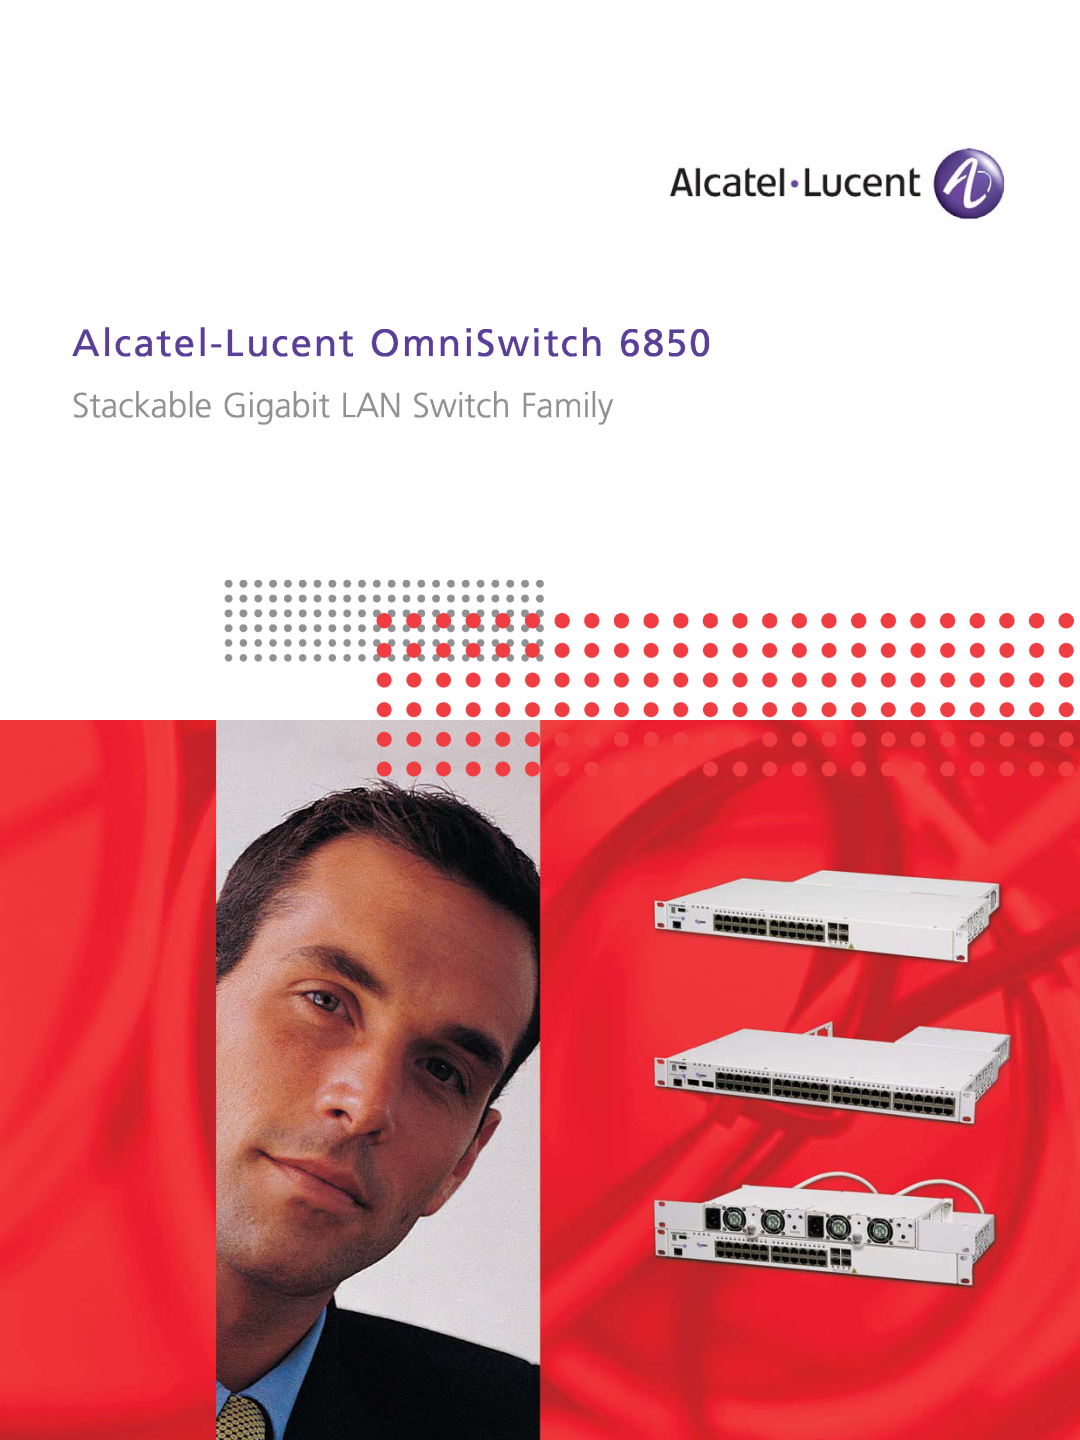 Riverstone Networks 6850 manual Alcatel-Lucent OmniSwitch, Stackable Gigabit LAN Switch Family 